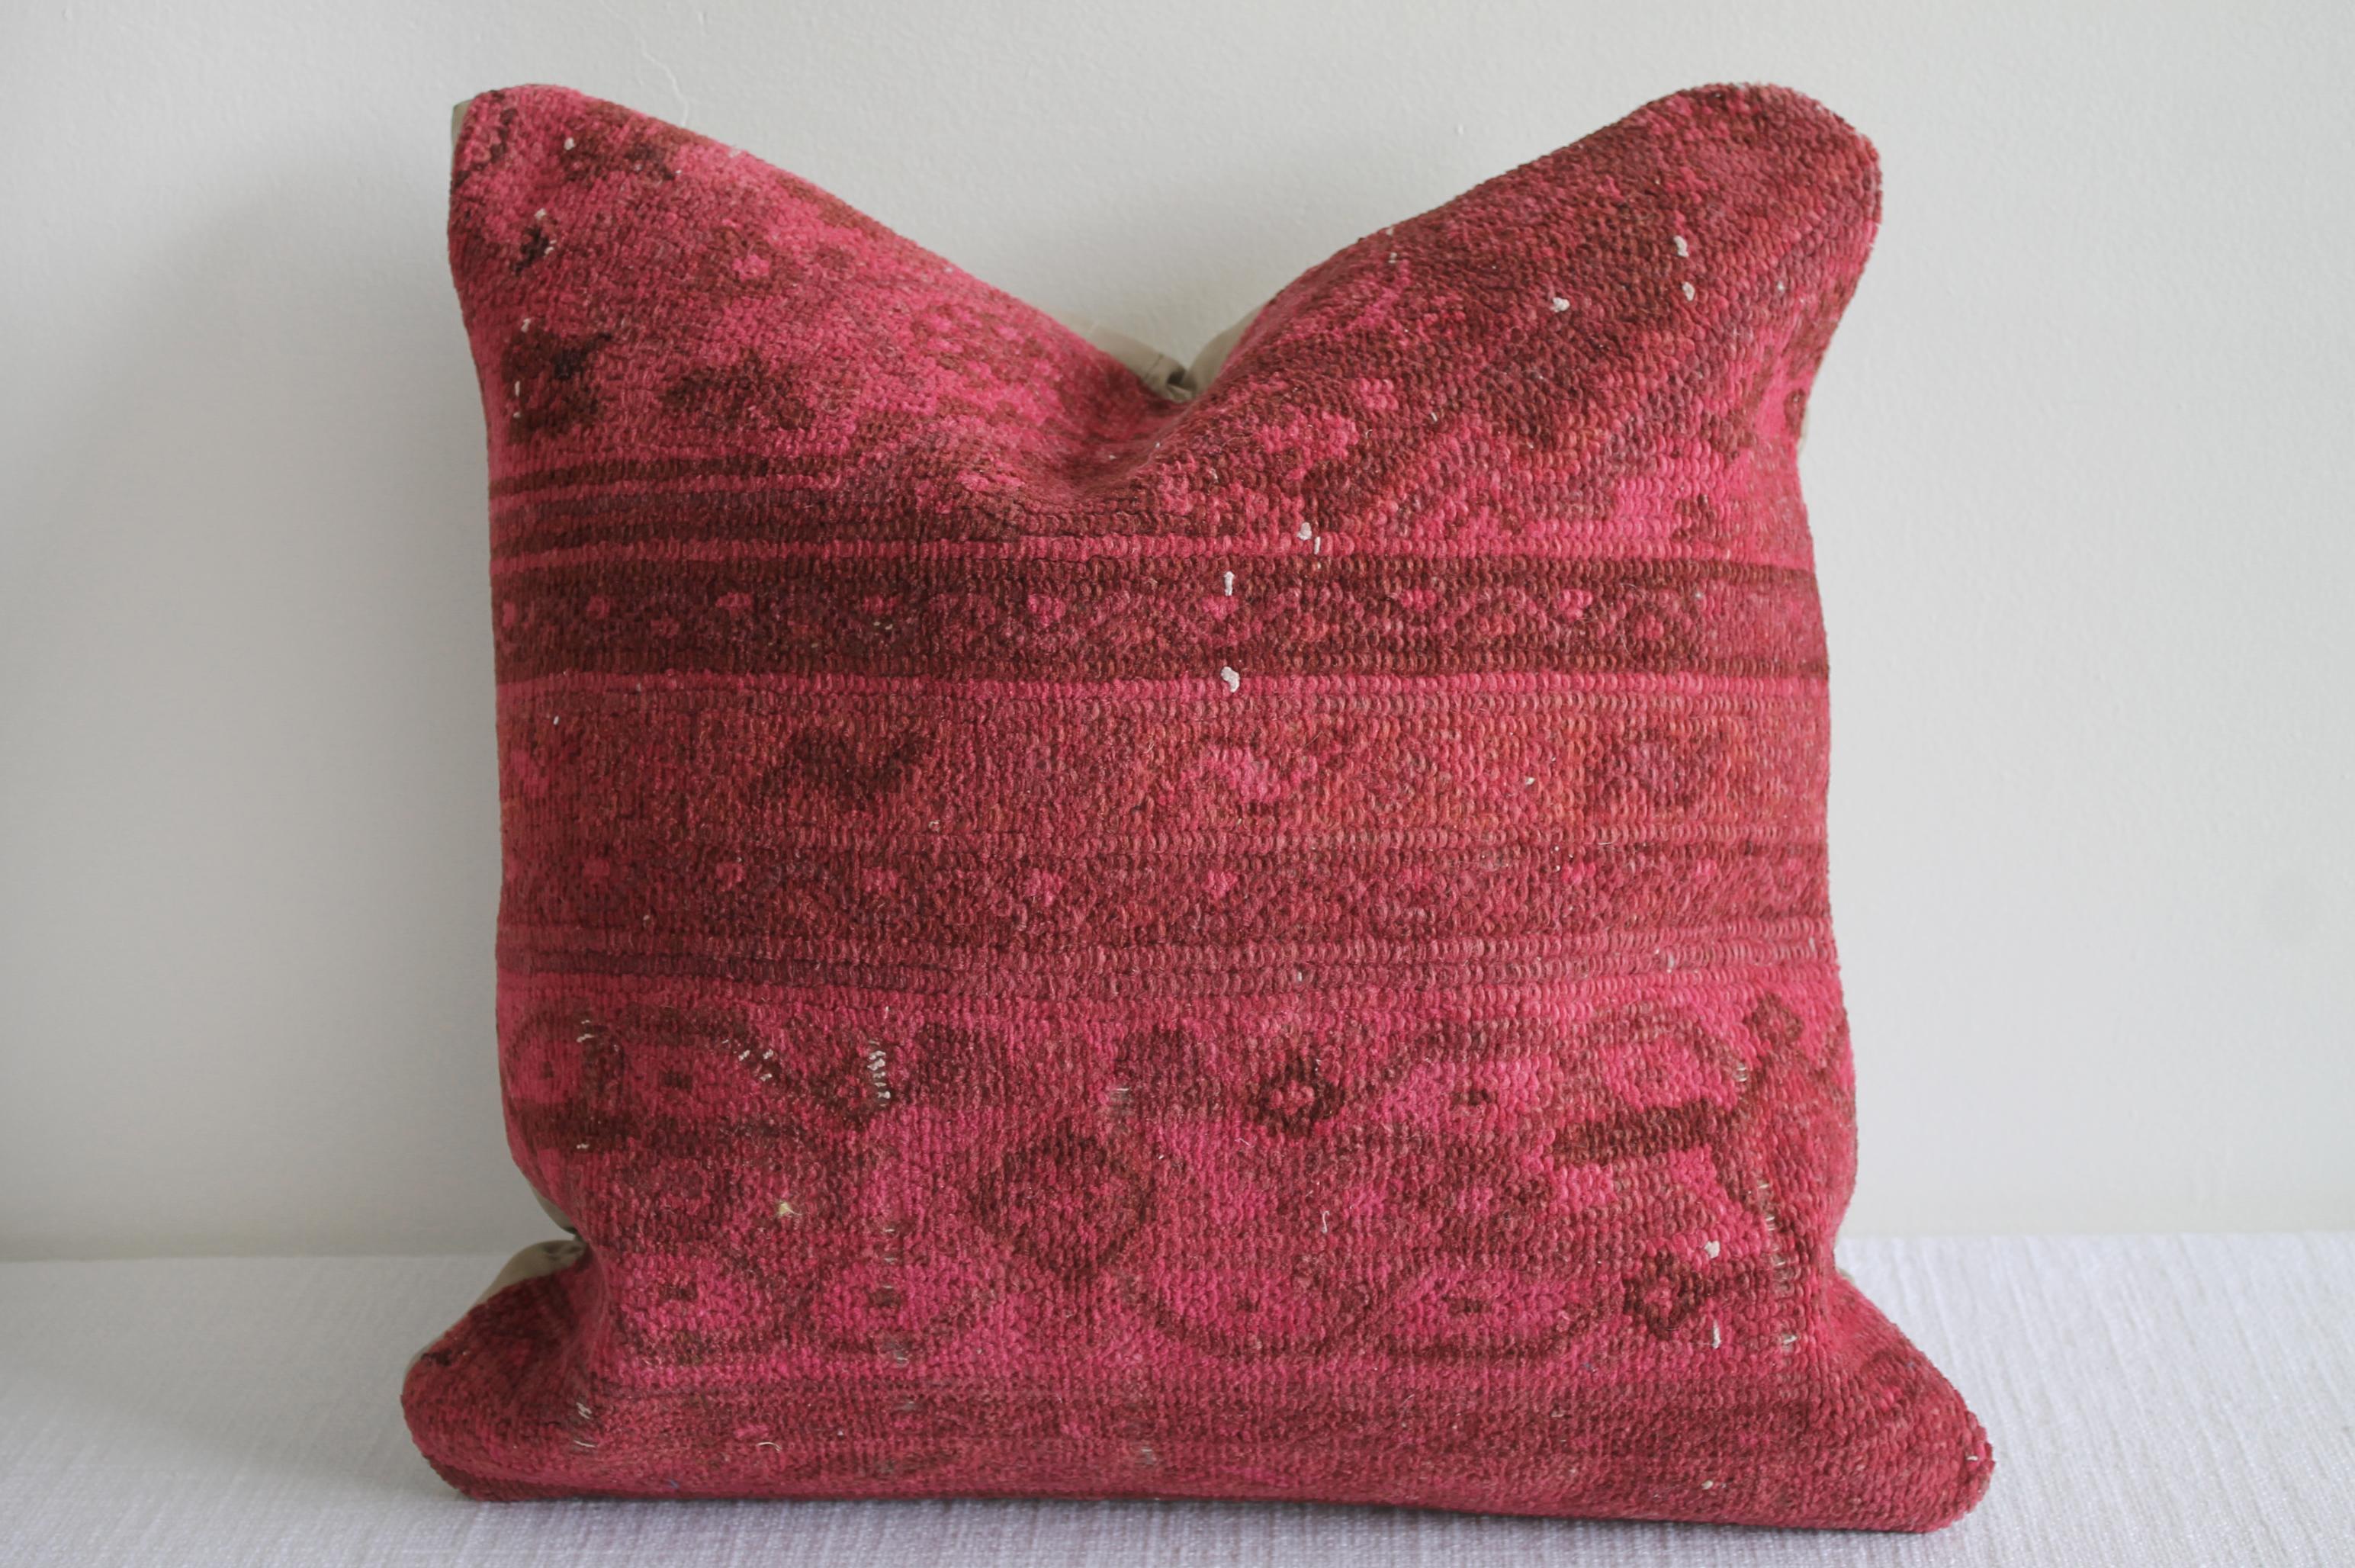 Vintage Turkish rug pillow
A bright deep pink and red pillow face with cotton backing.
Zipper closure.
No insert included.
Size: 20 x 20.